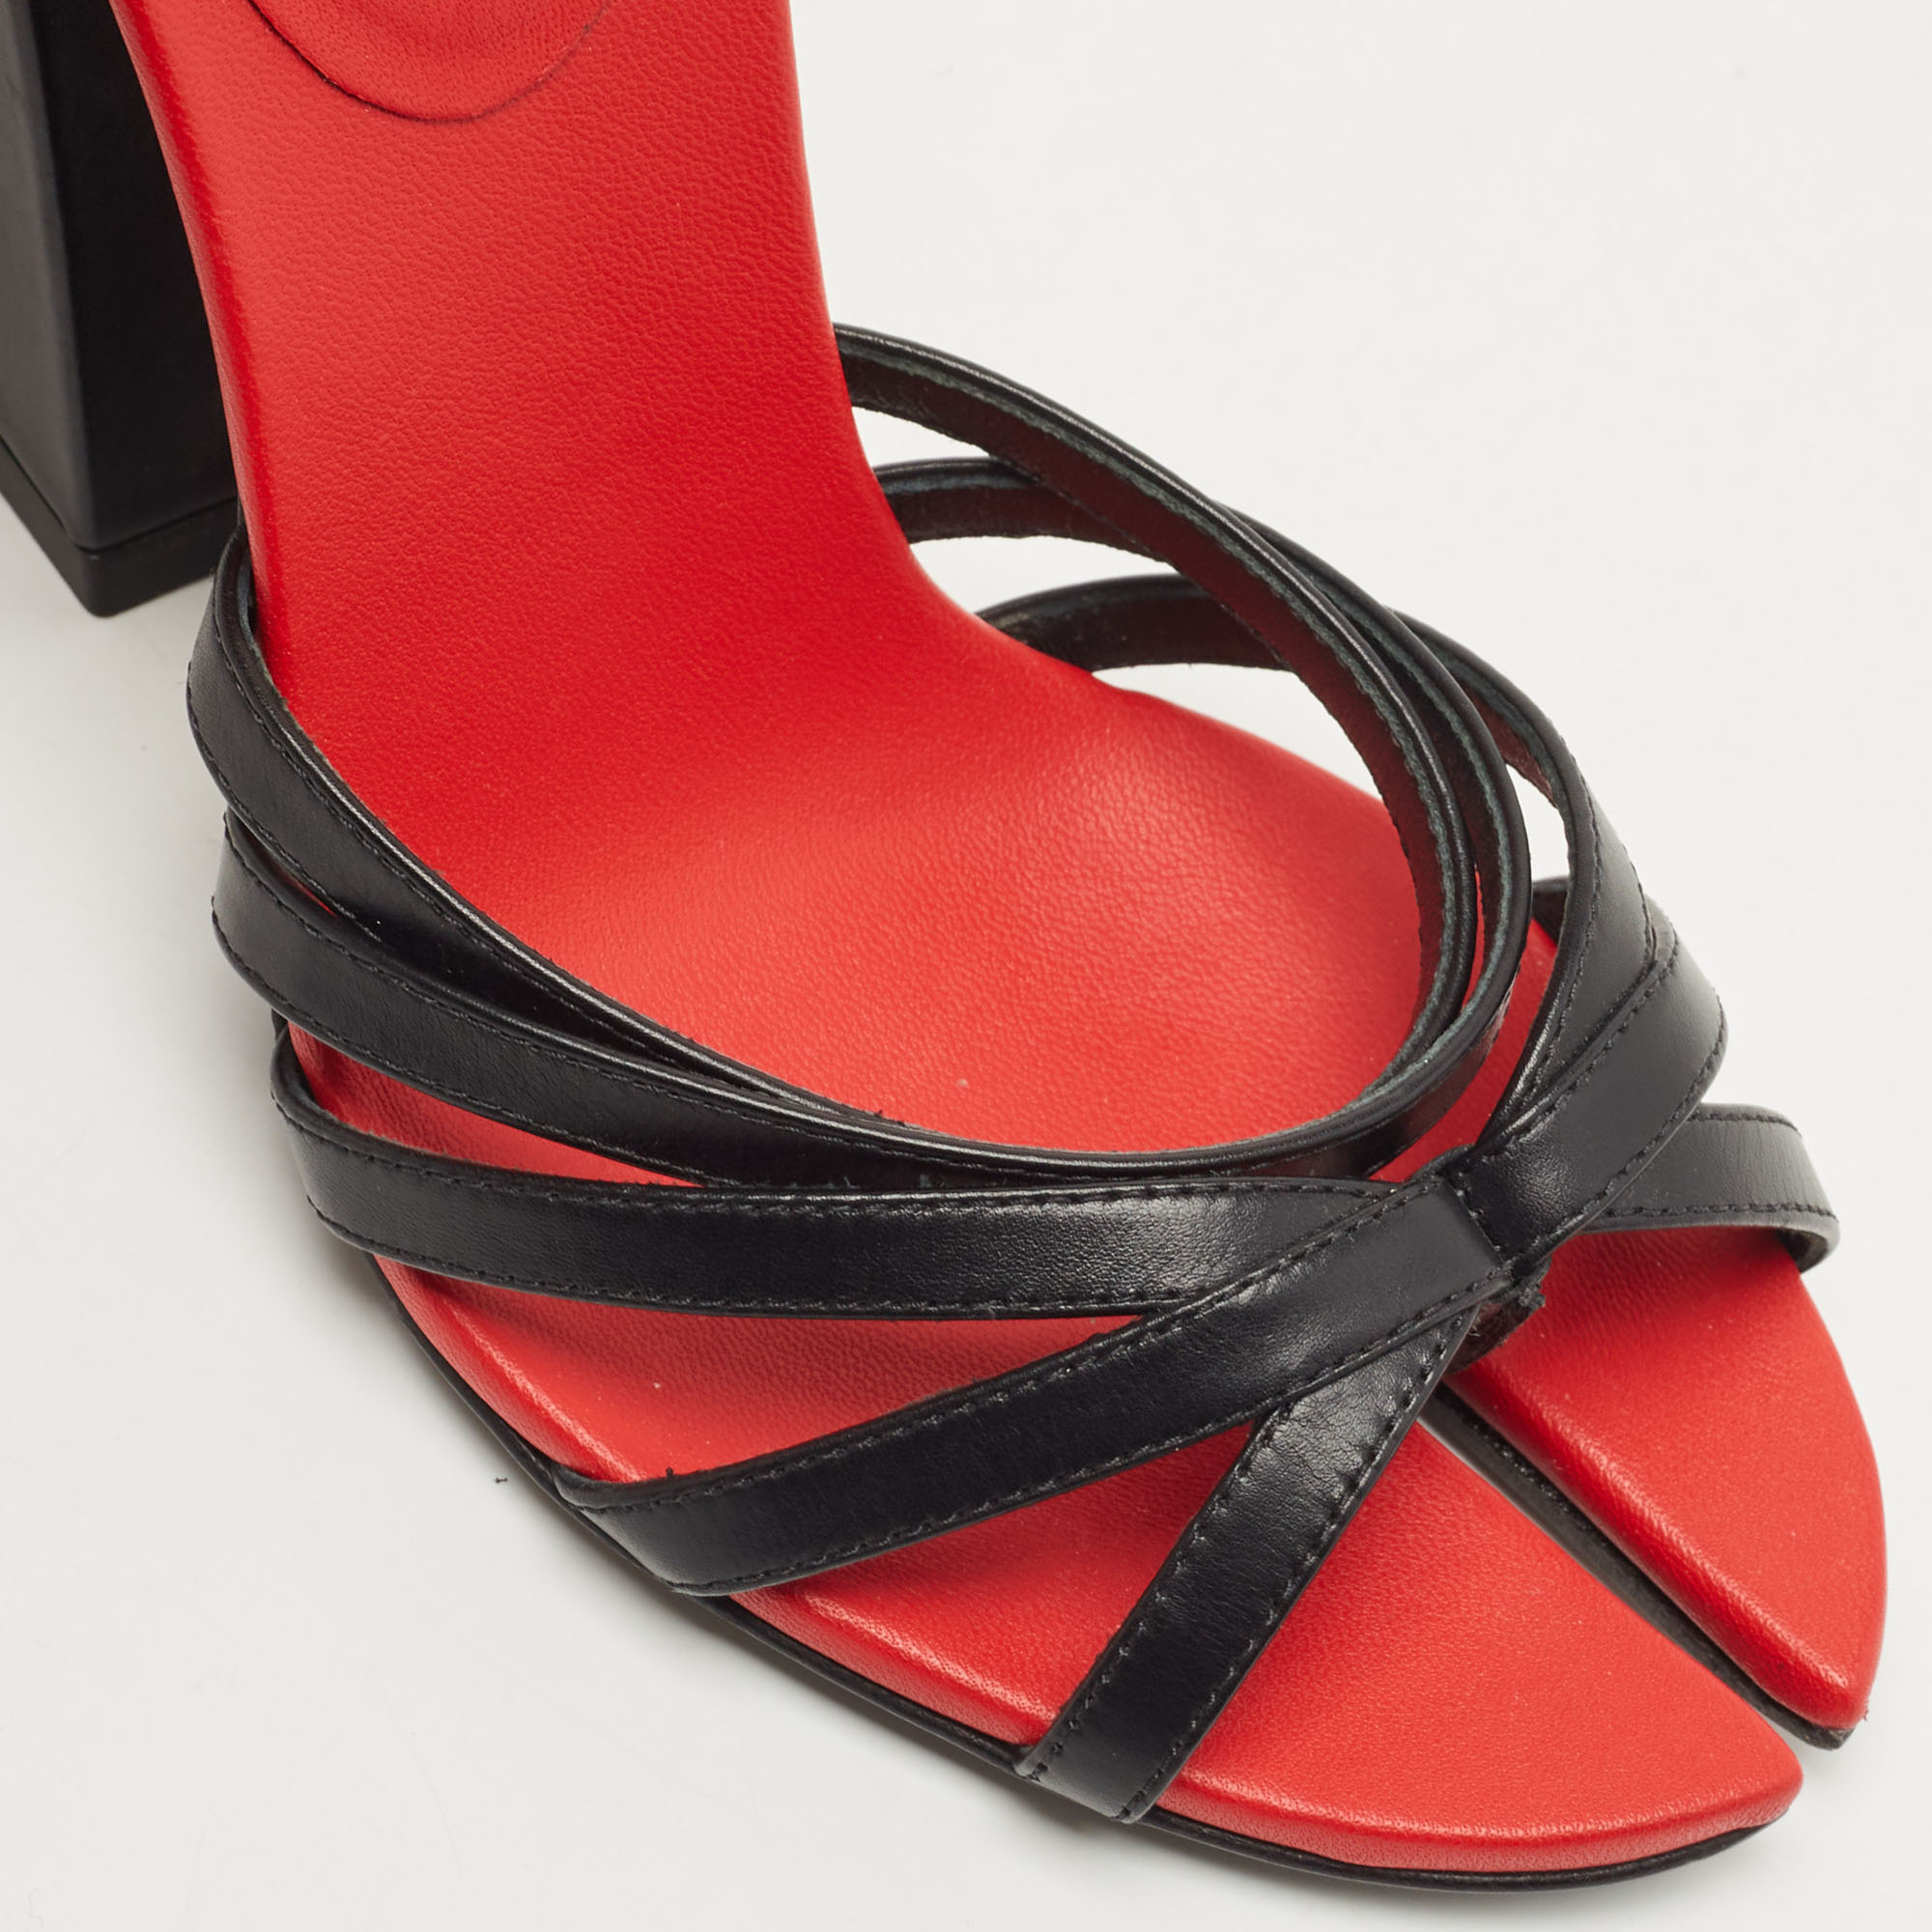 Burberry Black/Red Leather Hove Heel Ankle Strap Sandals Size 36